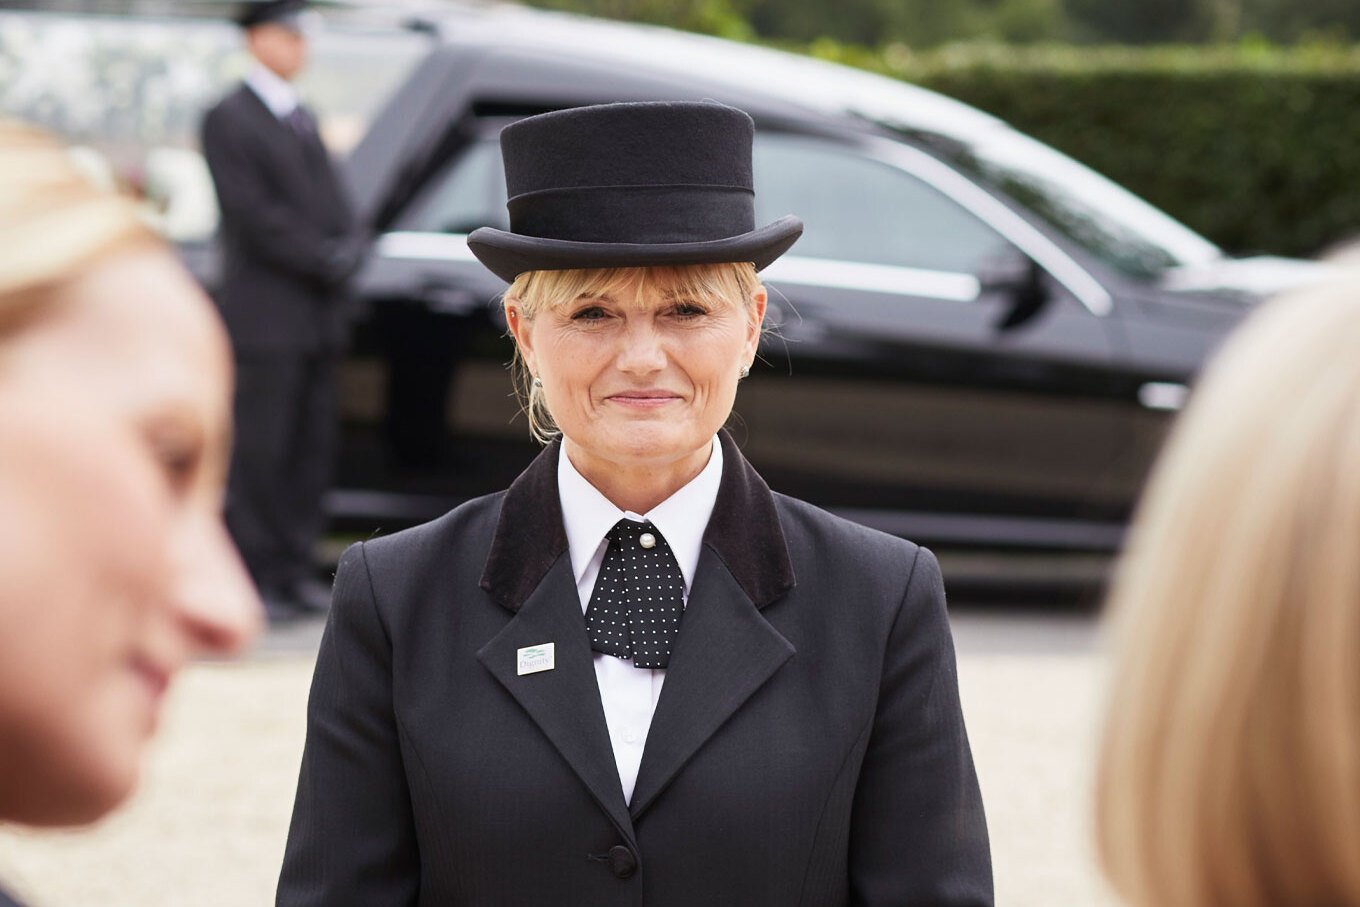 A female funeral director wears a black top hat and gives a compassionate smile to a family.